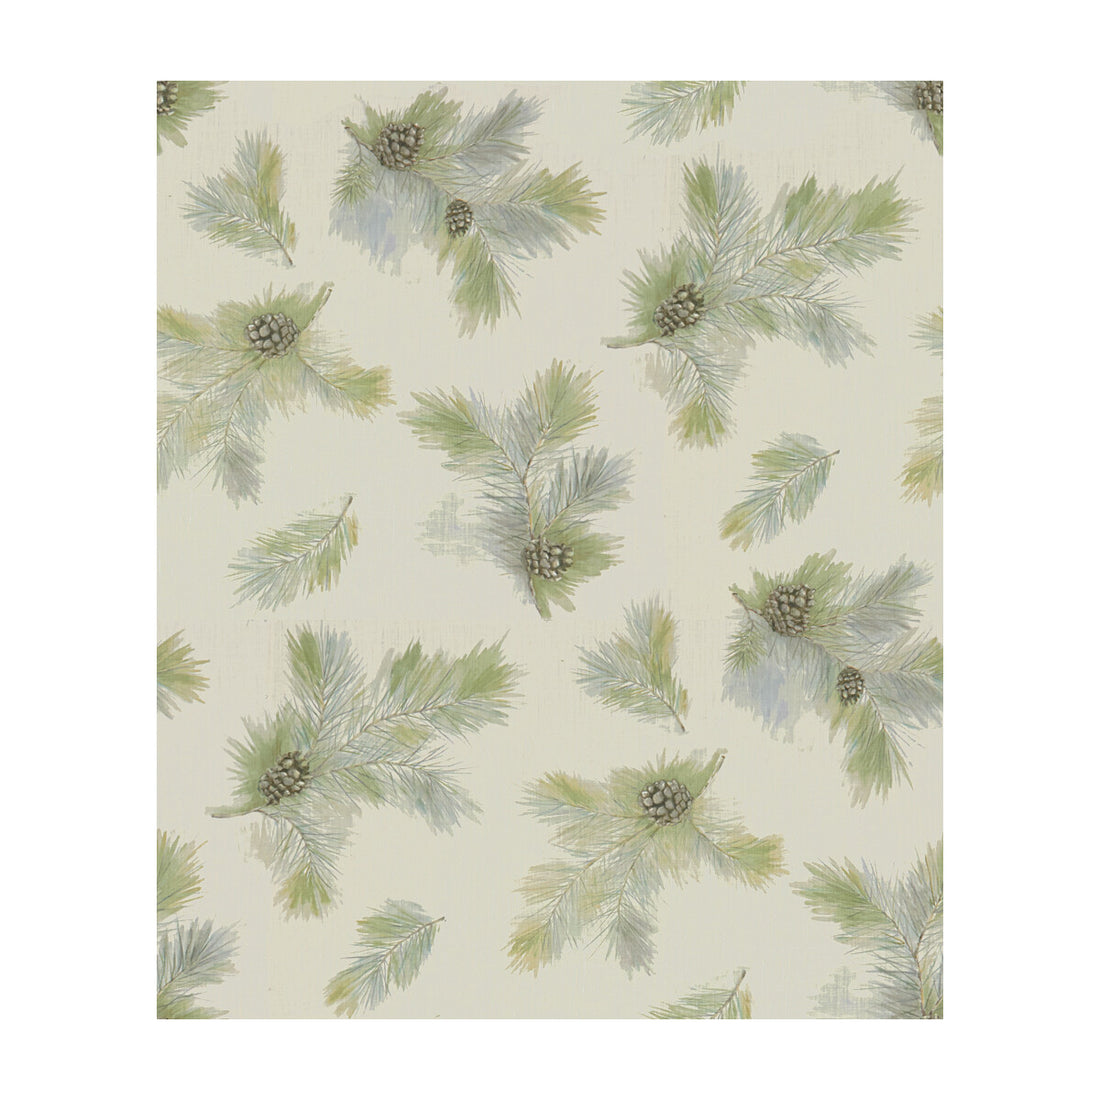 Idyllwild fabric in spring color - pattern IDYLLWILD.311.0 - by Kravet Couture in the Barbara Barry Chalet collection